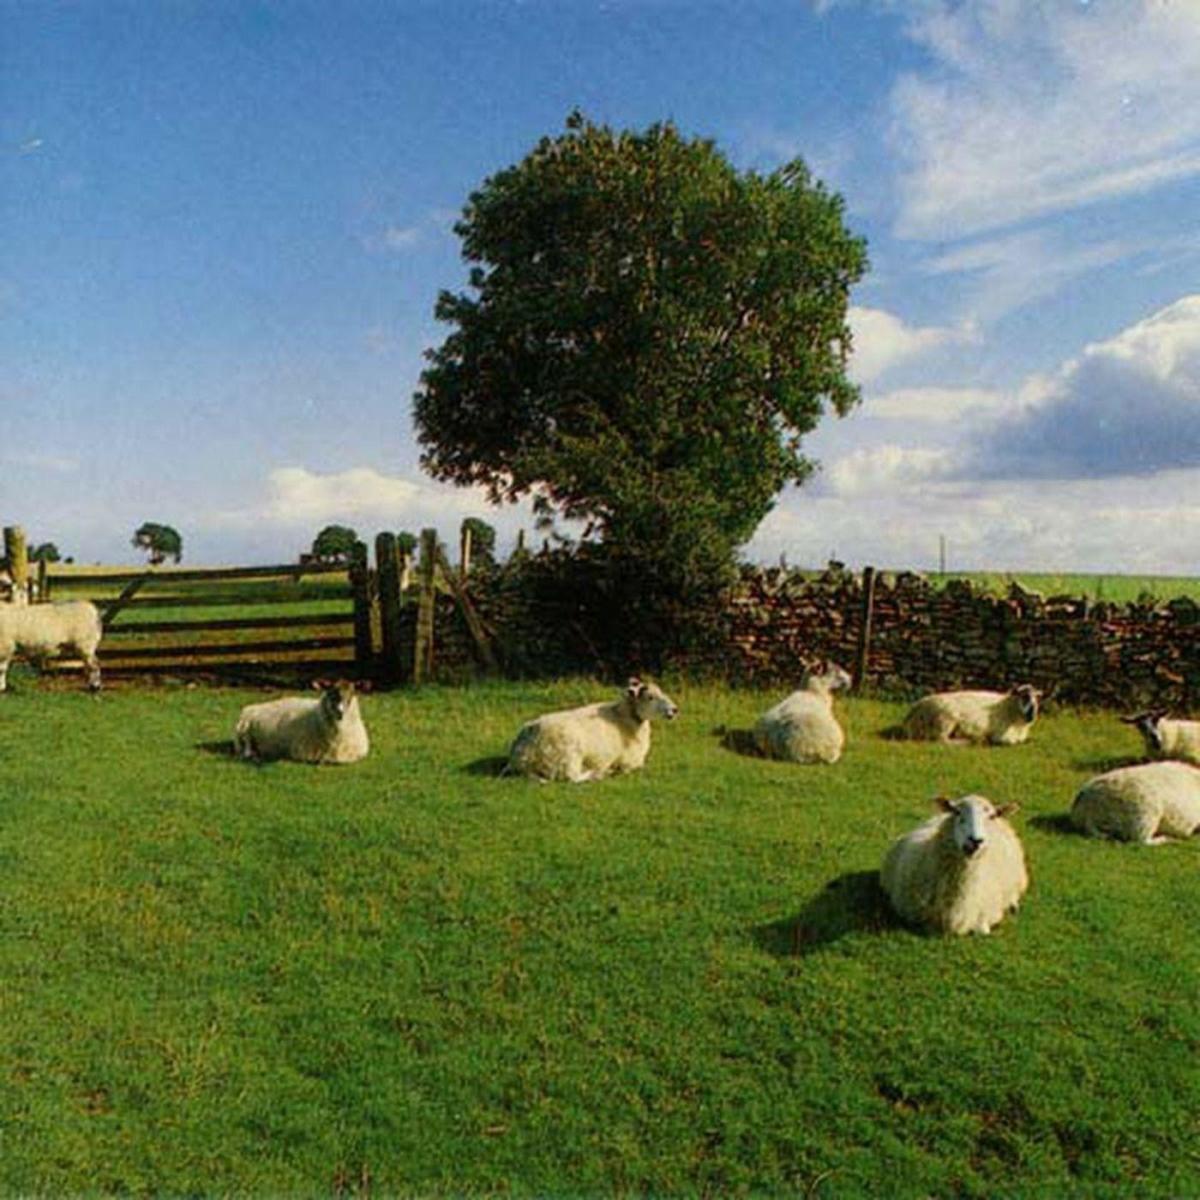 The KLF chill out